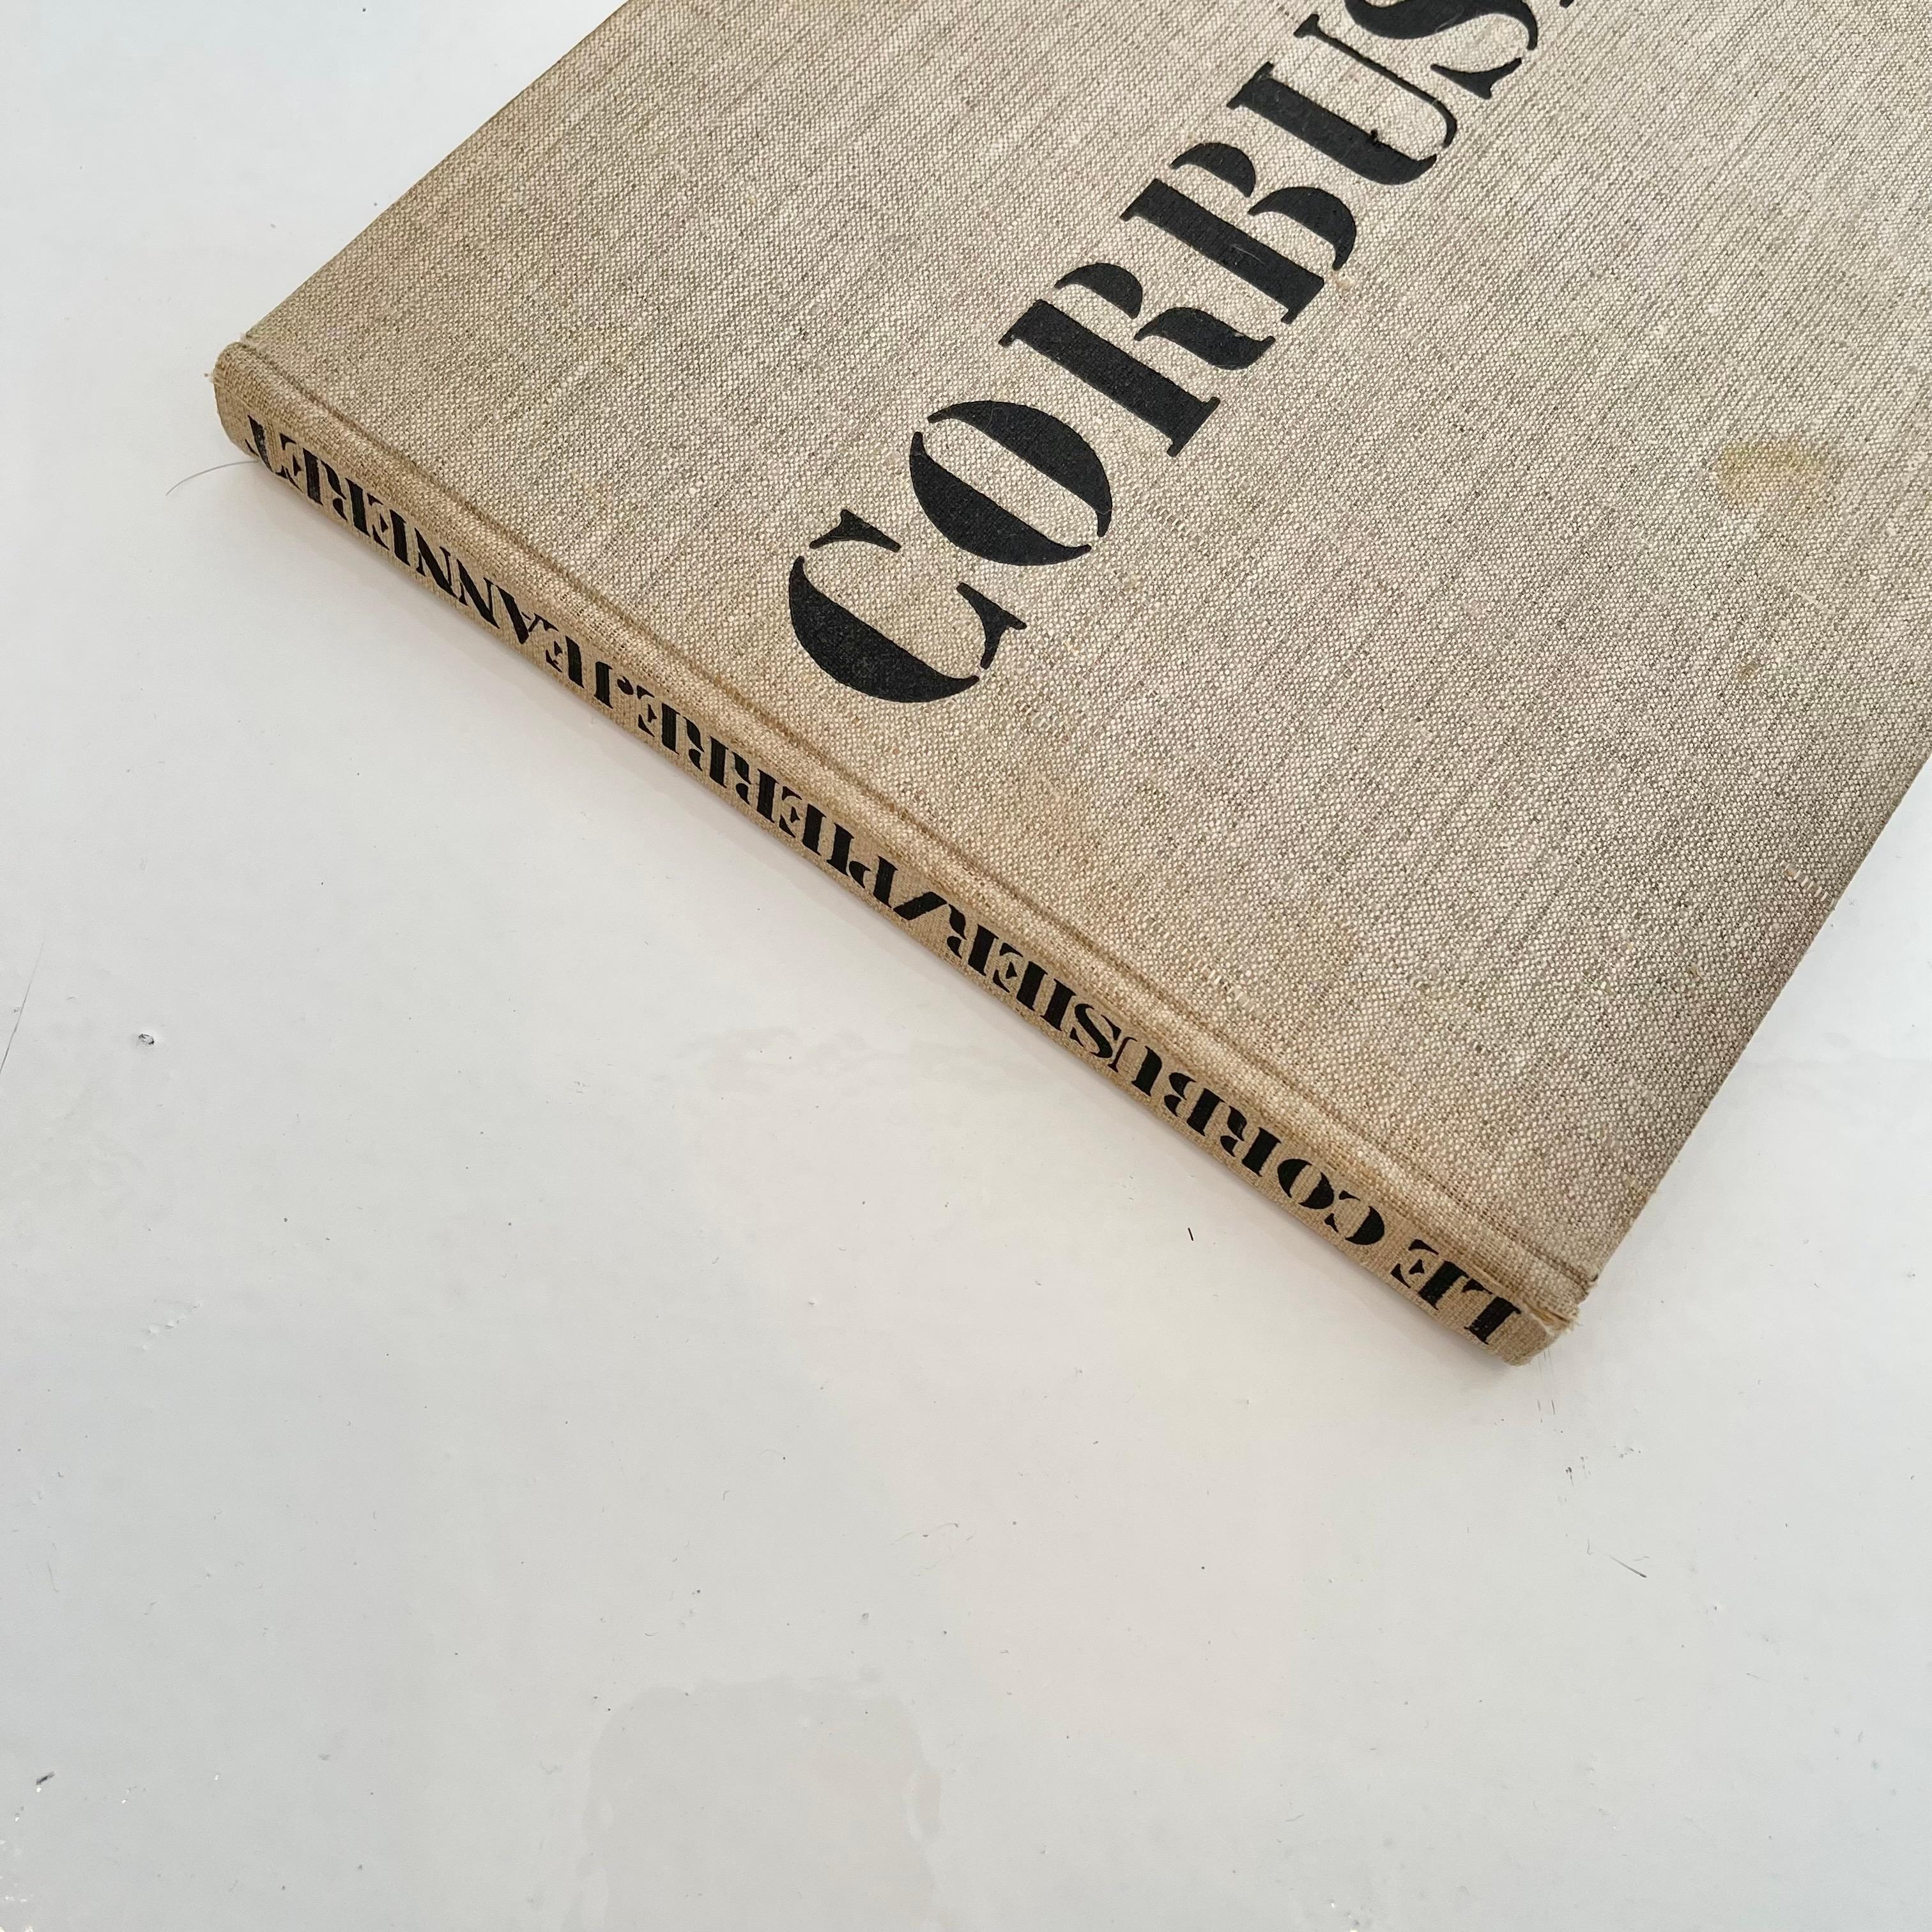 First edition Le Corbusier/Pierre Jeanneret book from 1937. Printed in Switzerland. Complete works from 1910 - 1929. 216 page book with numerous drawings and photographs. Binding made of linen and has age/staining as shown. Original dust jacket